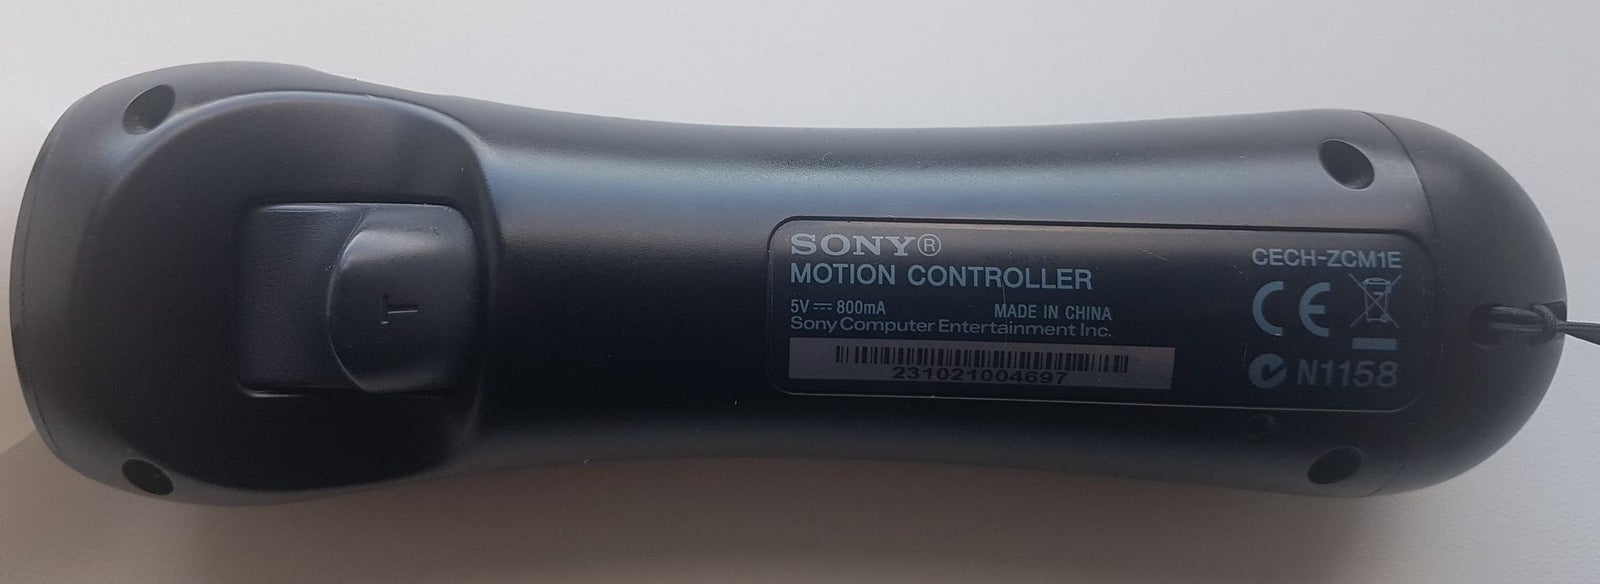 Controller, Playstation 3, Sony